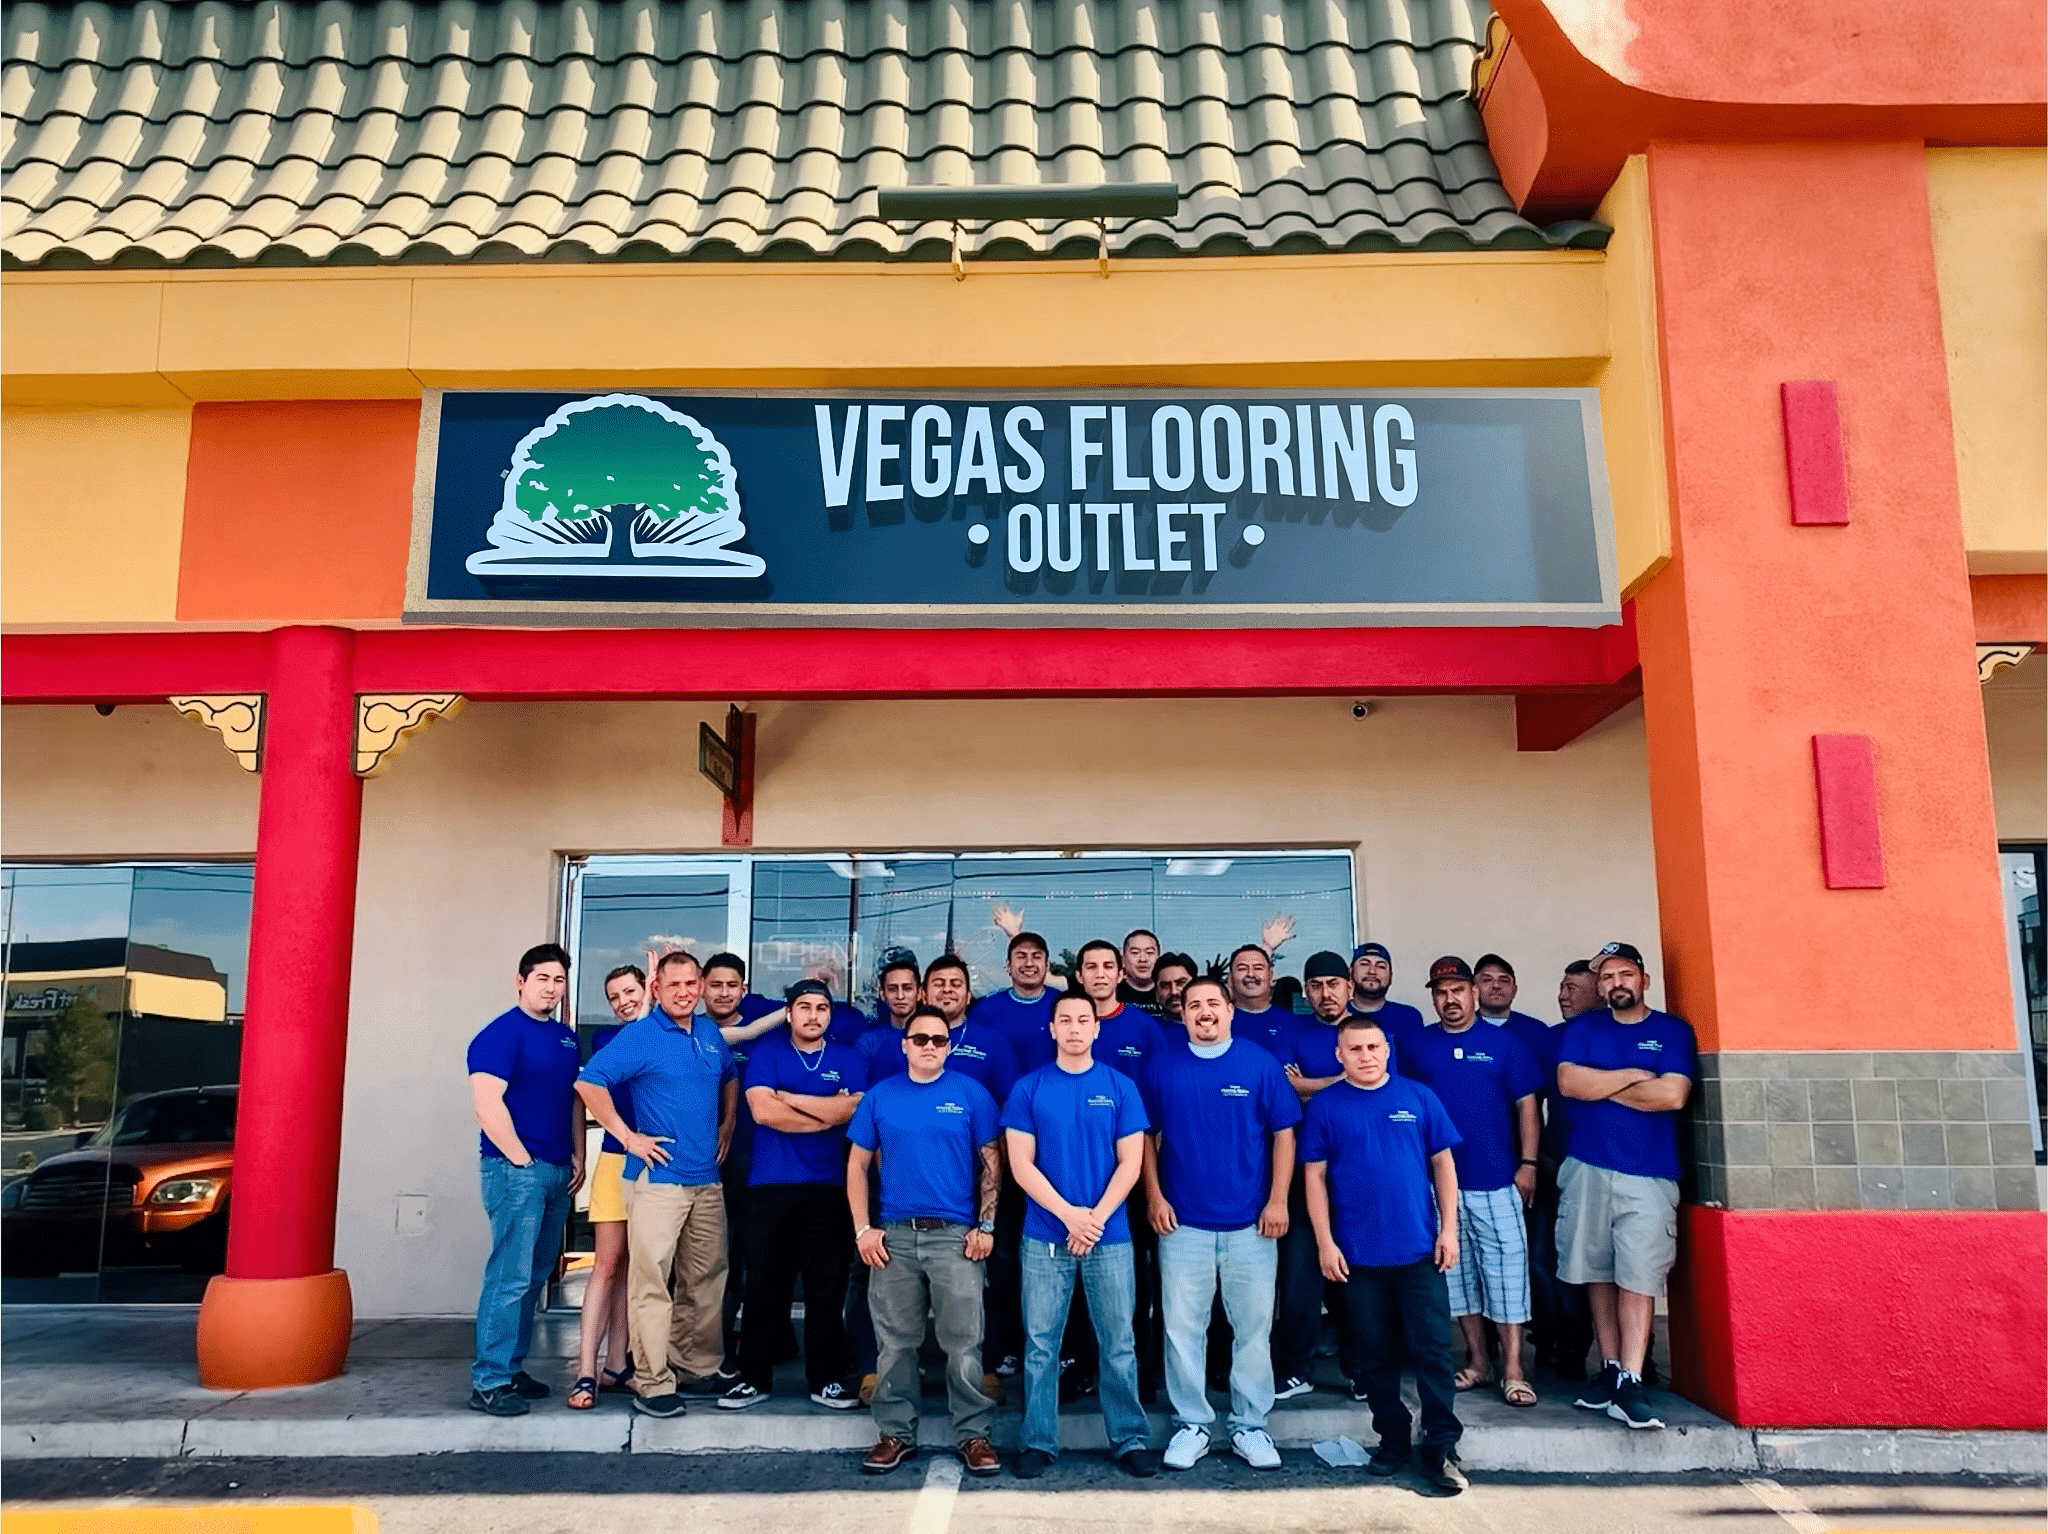 A Group Picture Of Vegas Flooring Outlet Employees Standing In Front Of The Company